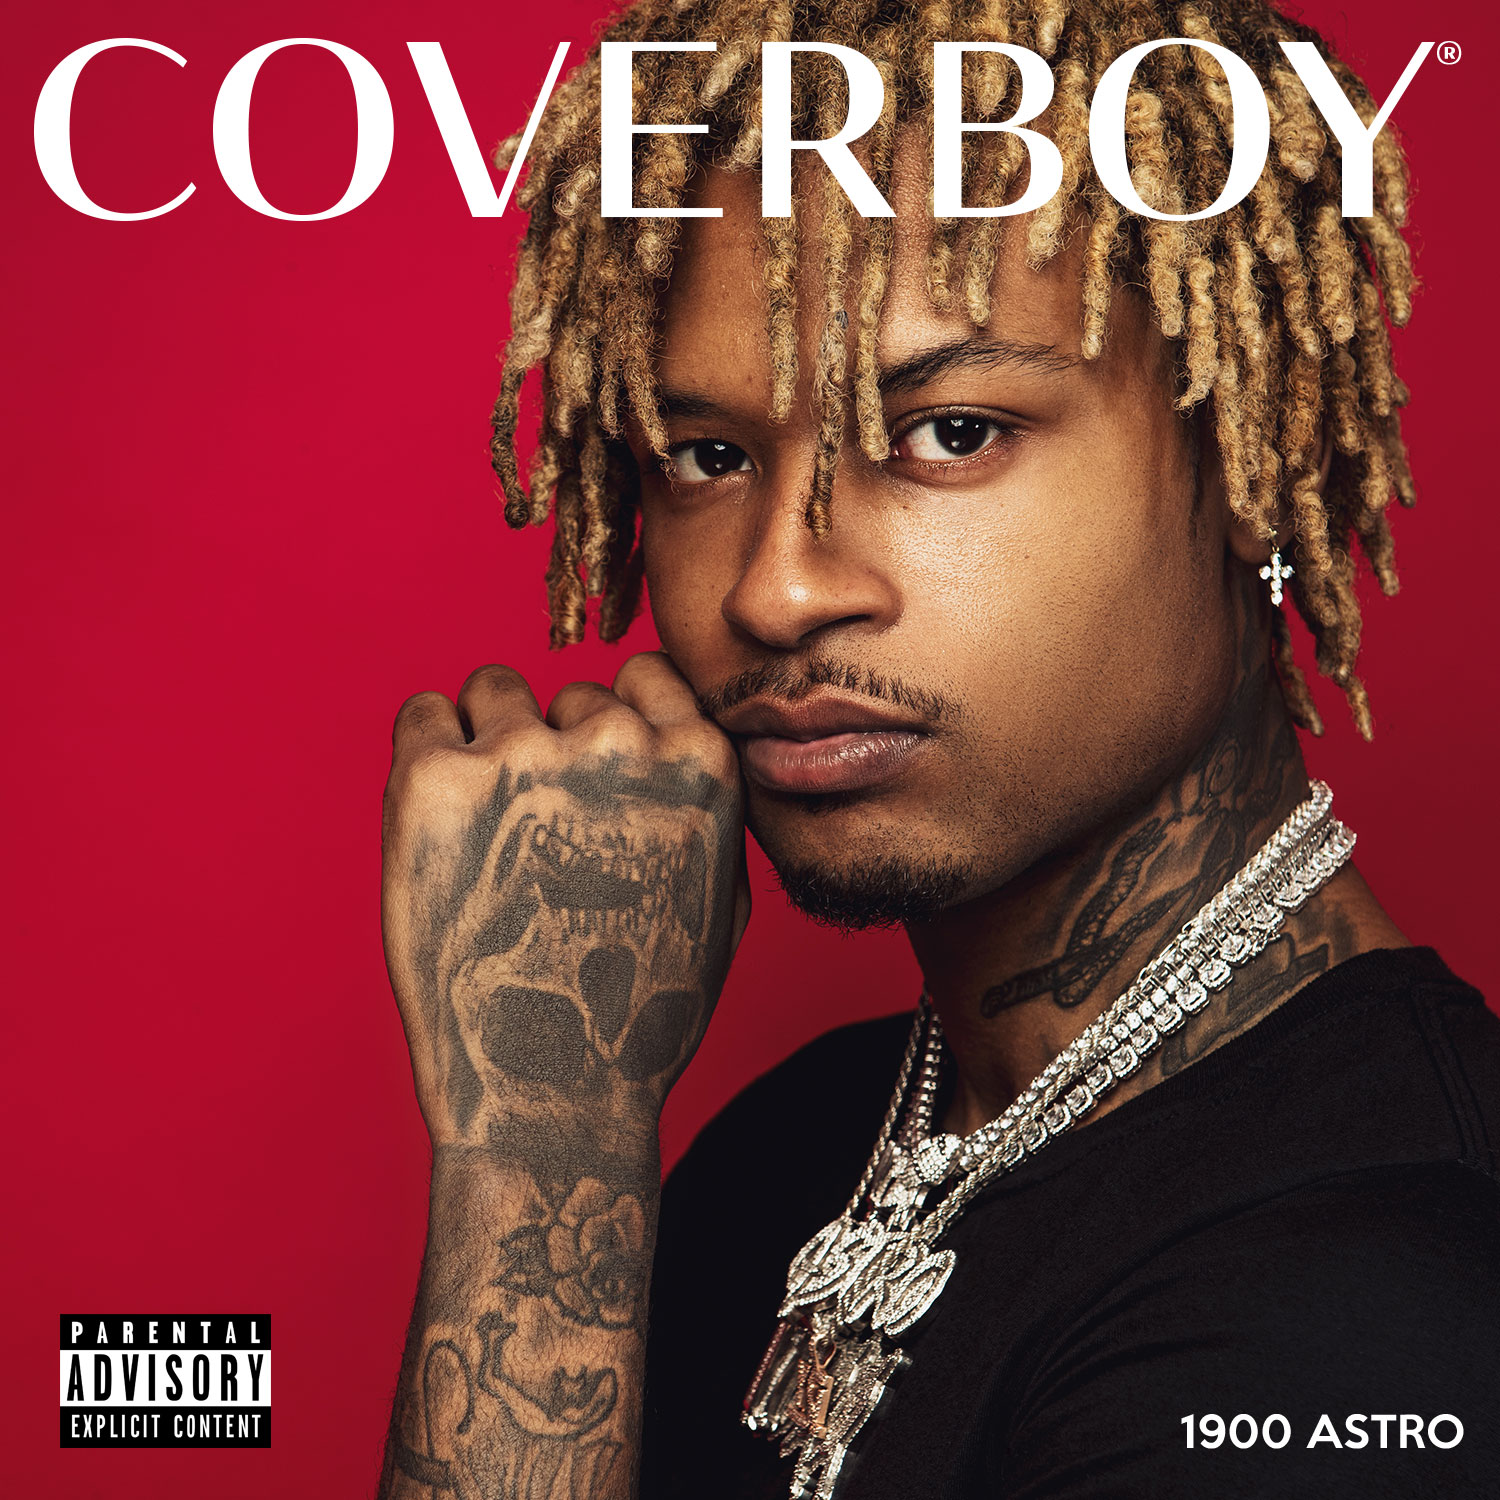 1900 Astro - Coverboy Cover Art